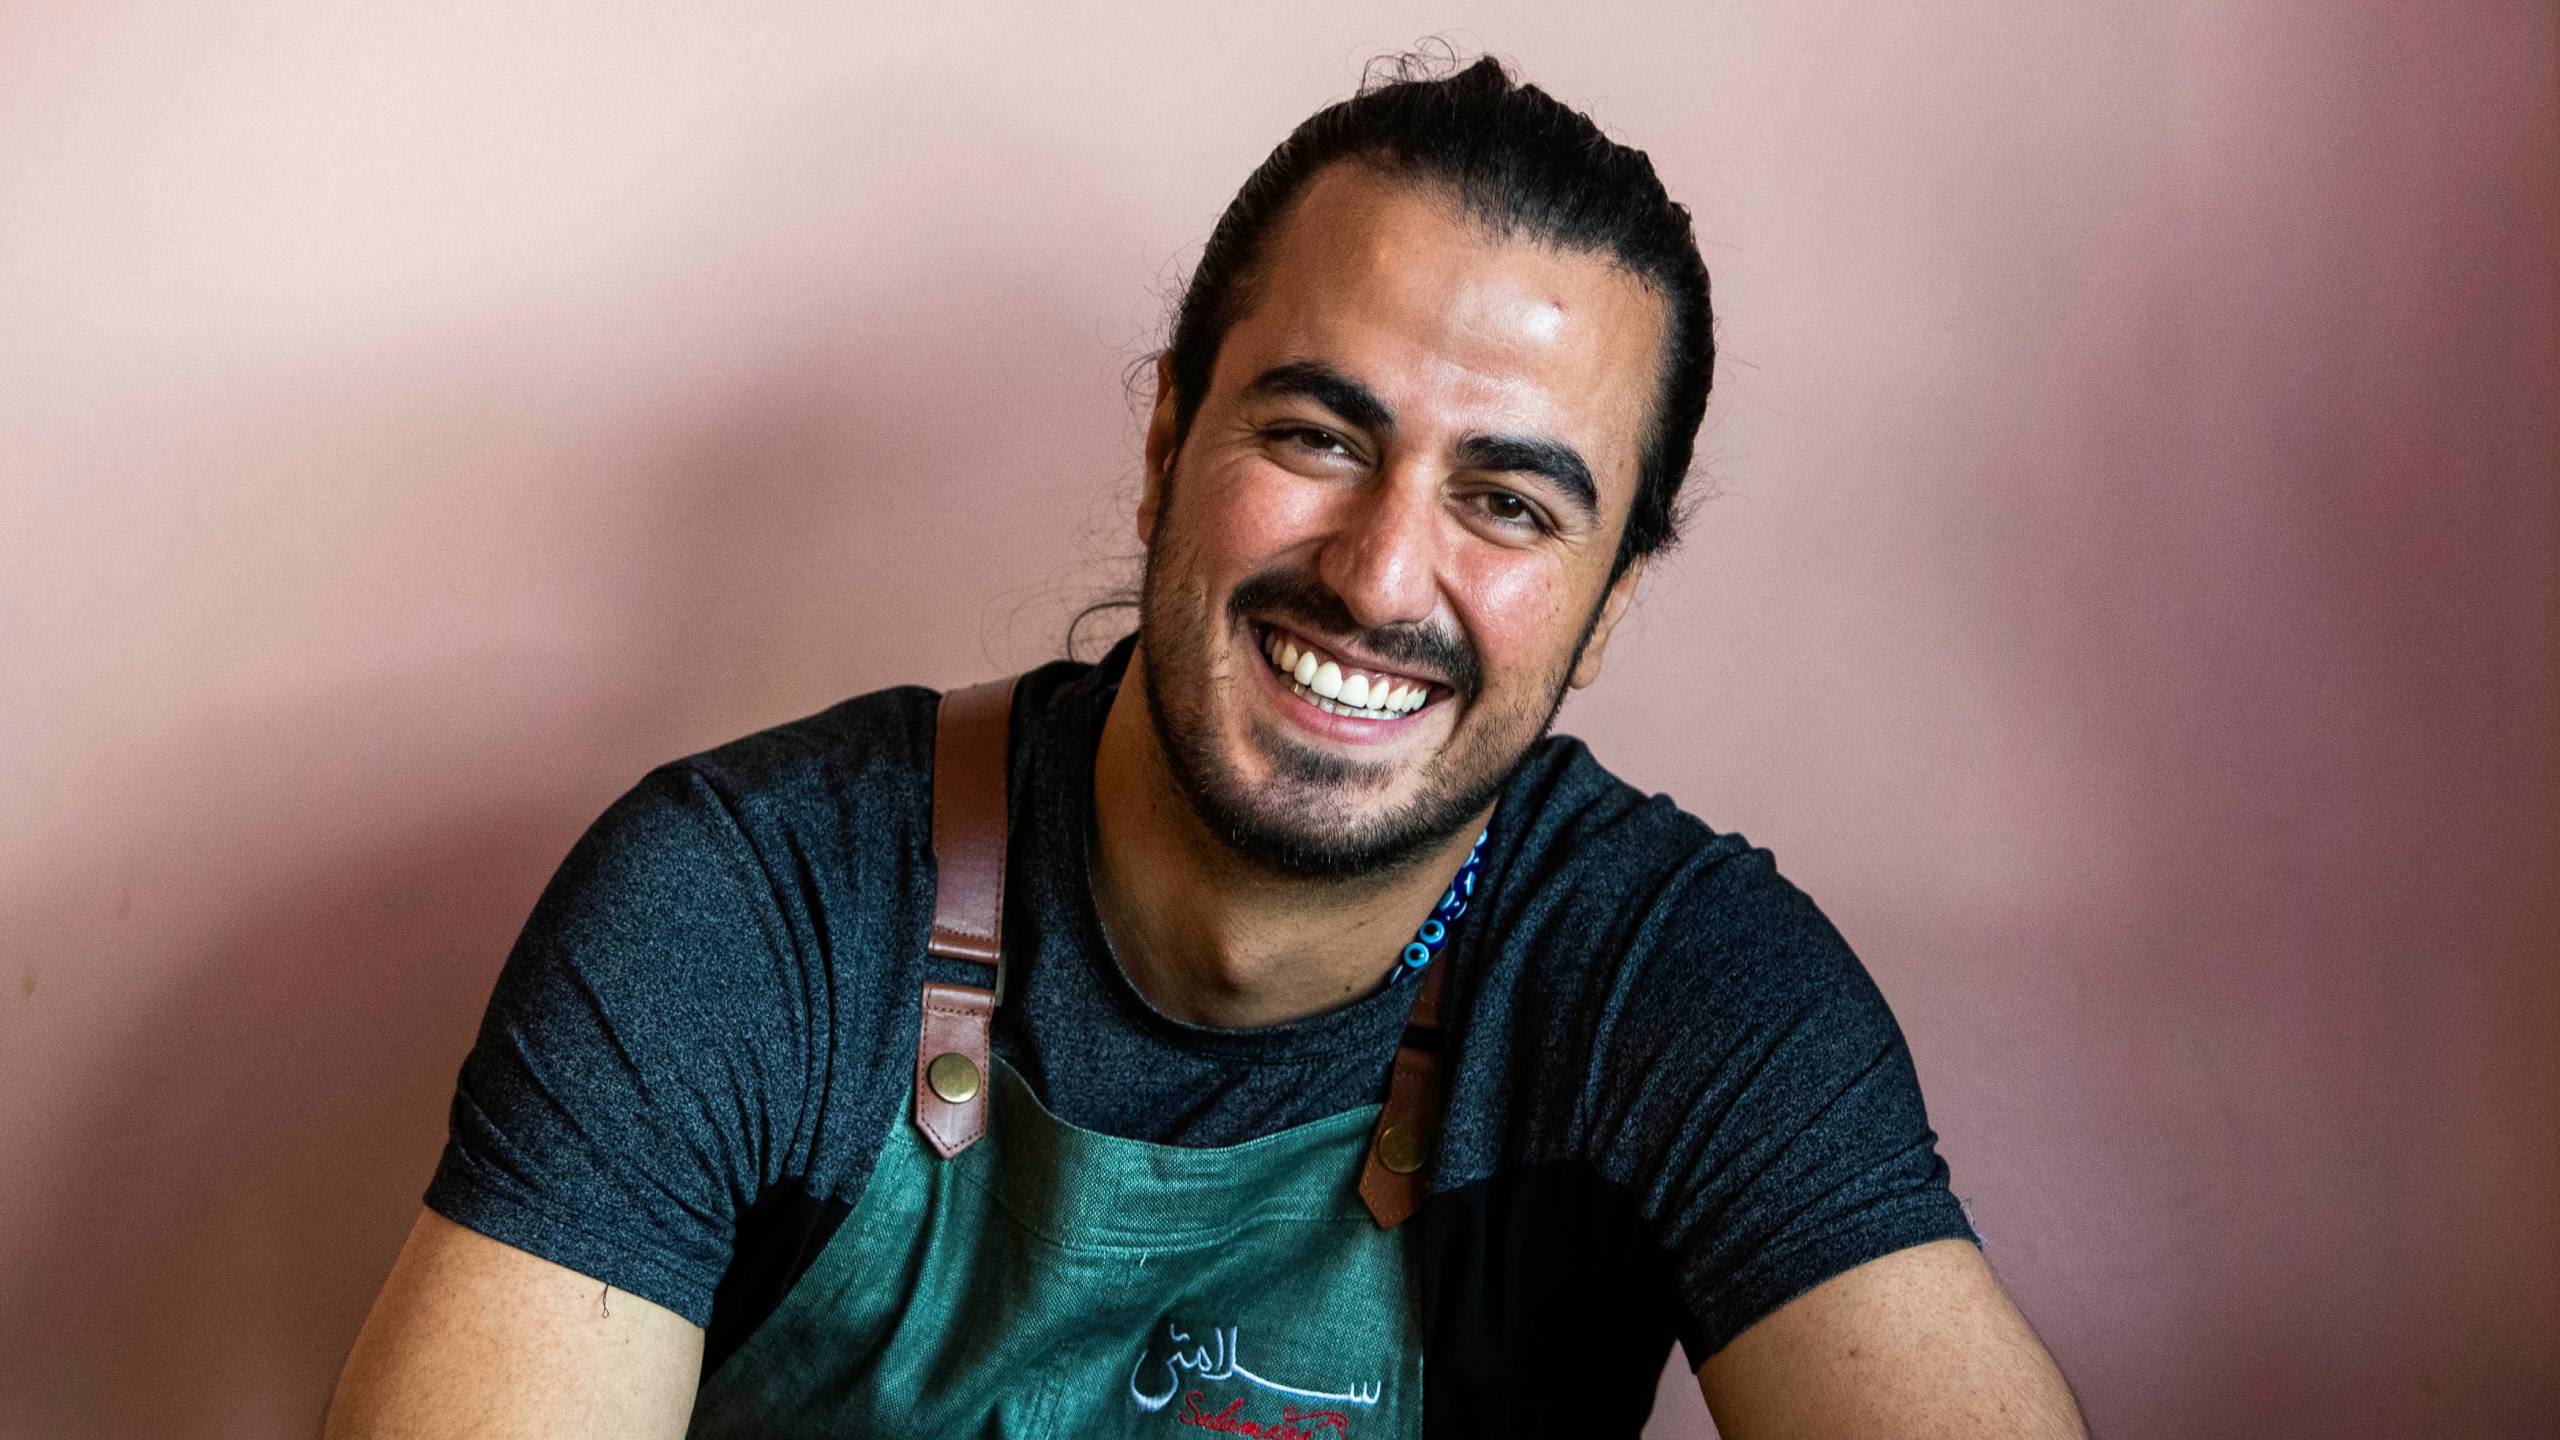 Hamed Allahyari in a Salamatea House apron against a pink wall